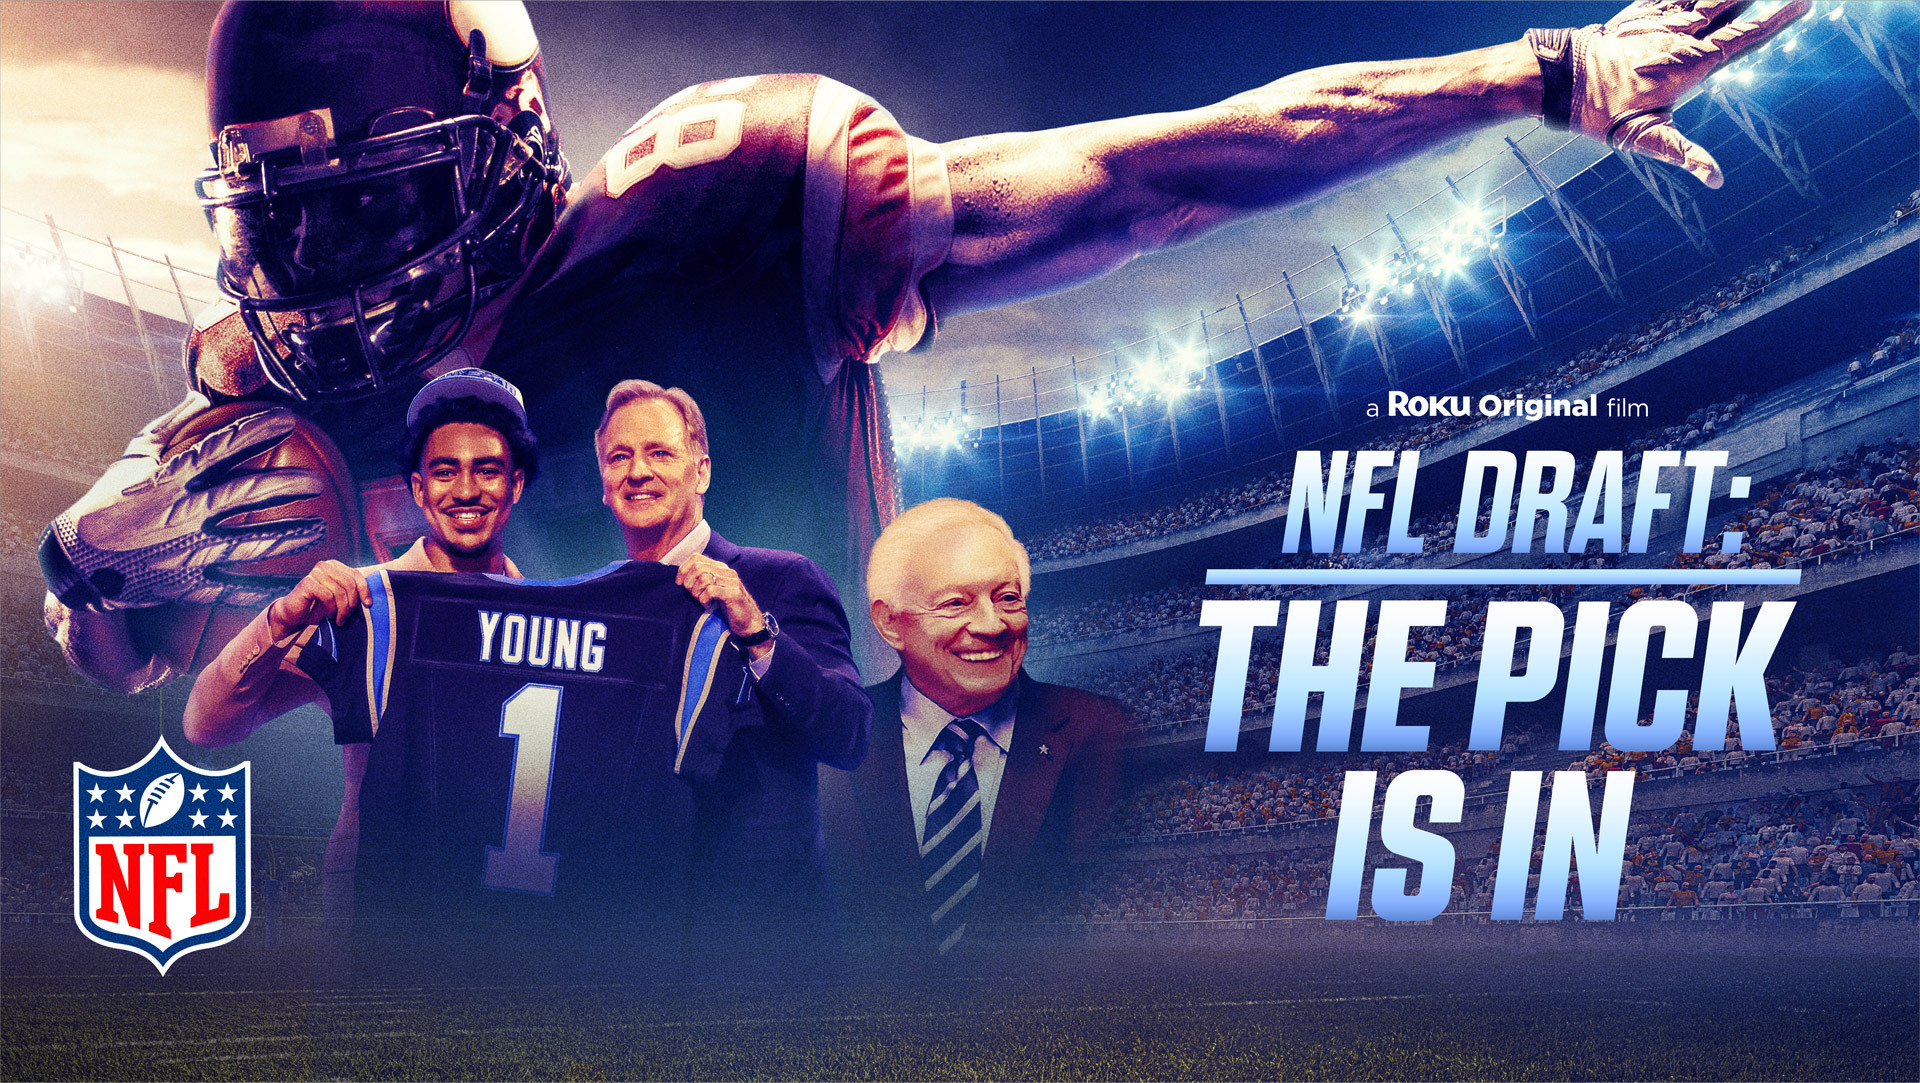 NFL Draft The Pick Is In” Scores with the #1 Roku Original Documentary Premiere Roku